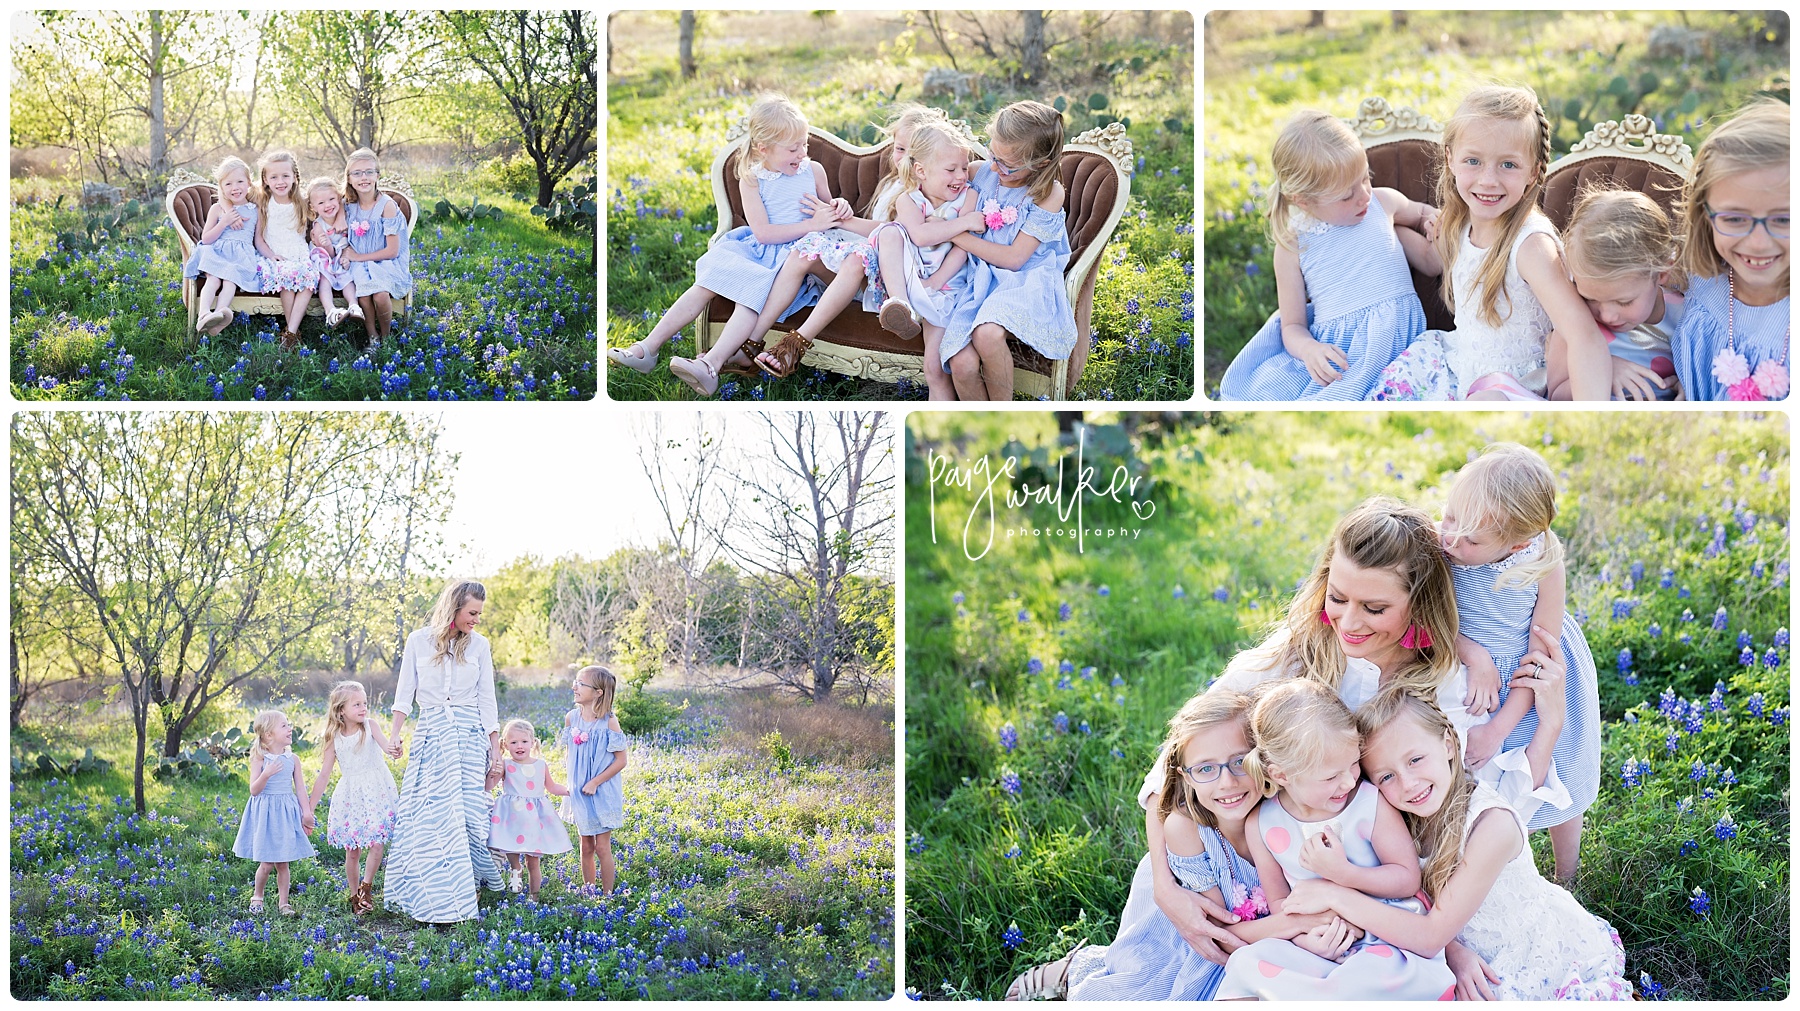 four sisters sitting together in bluebonnets